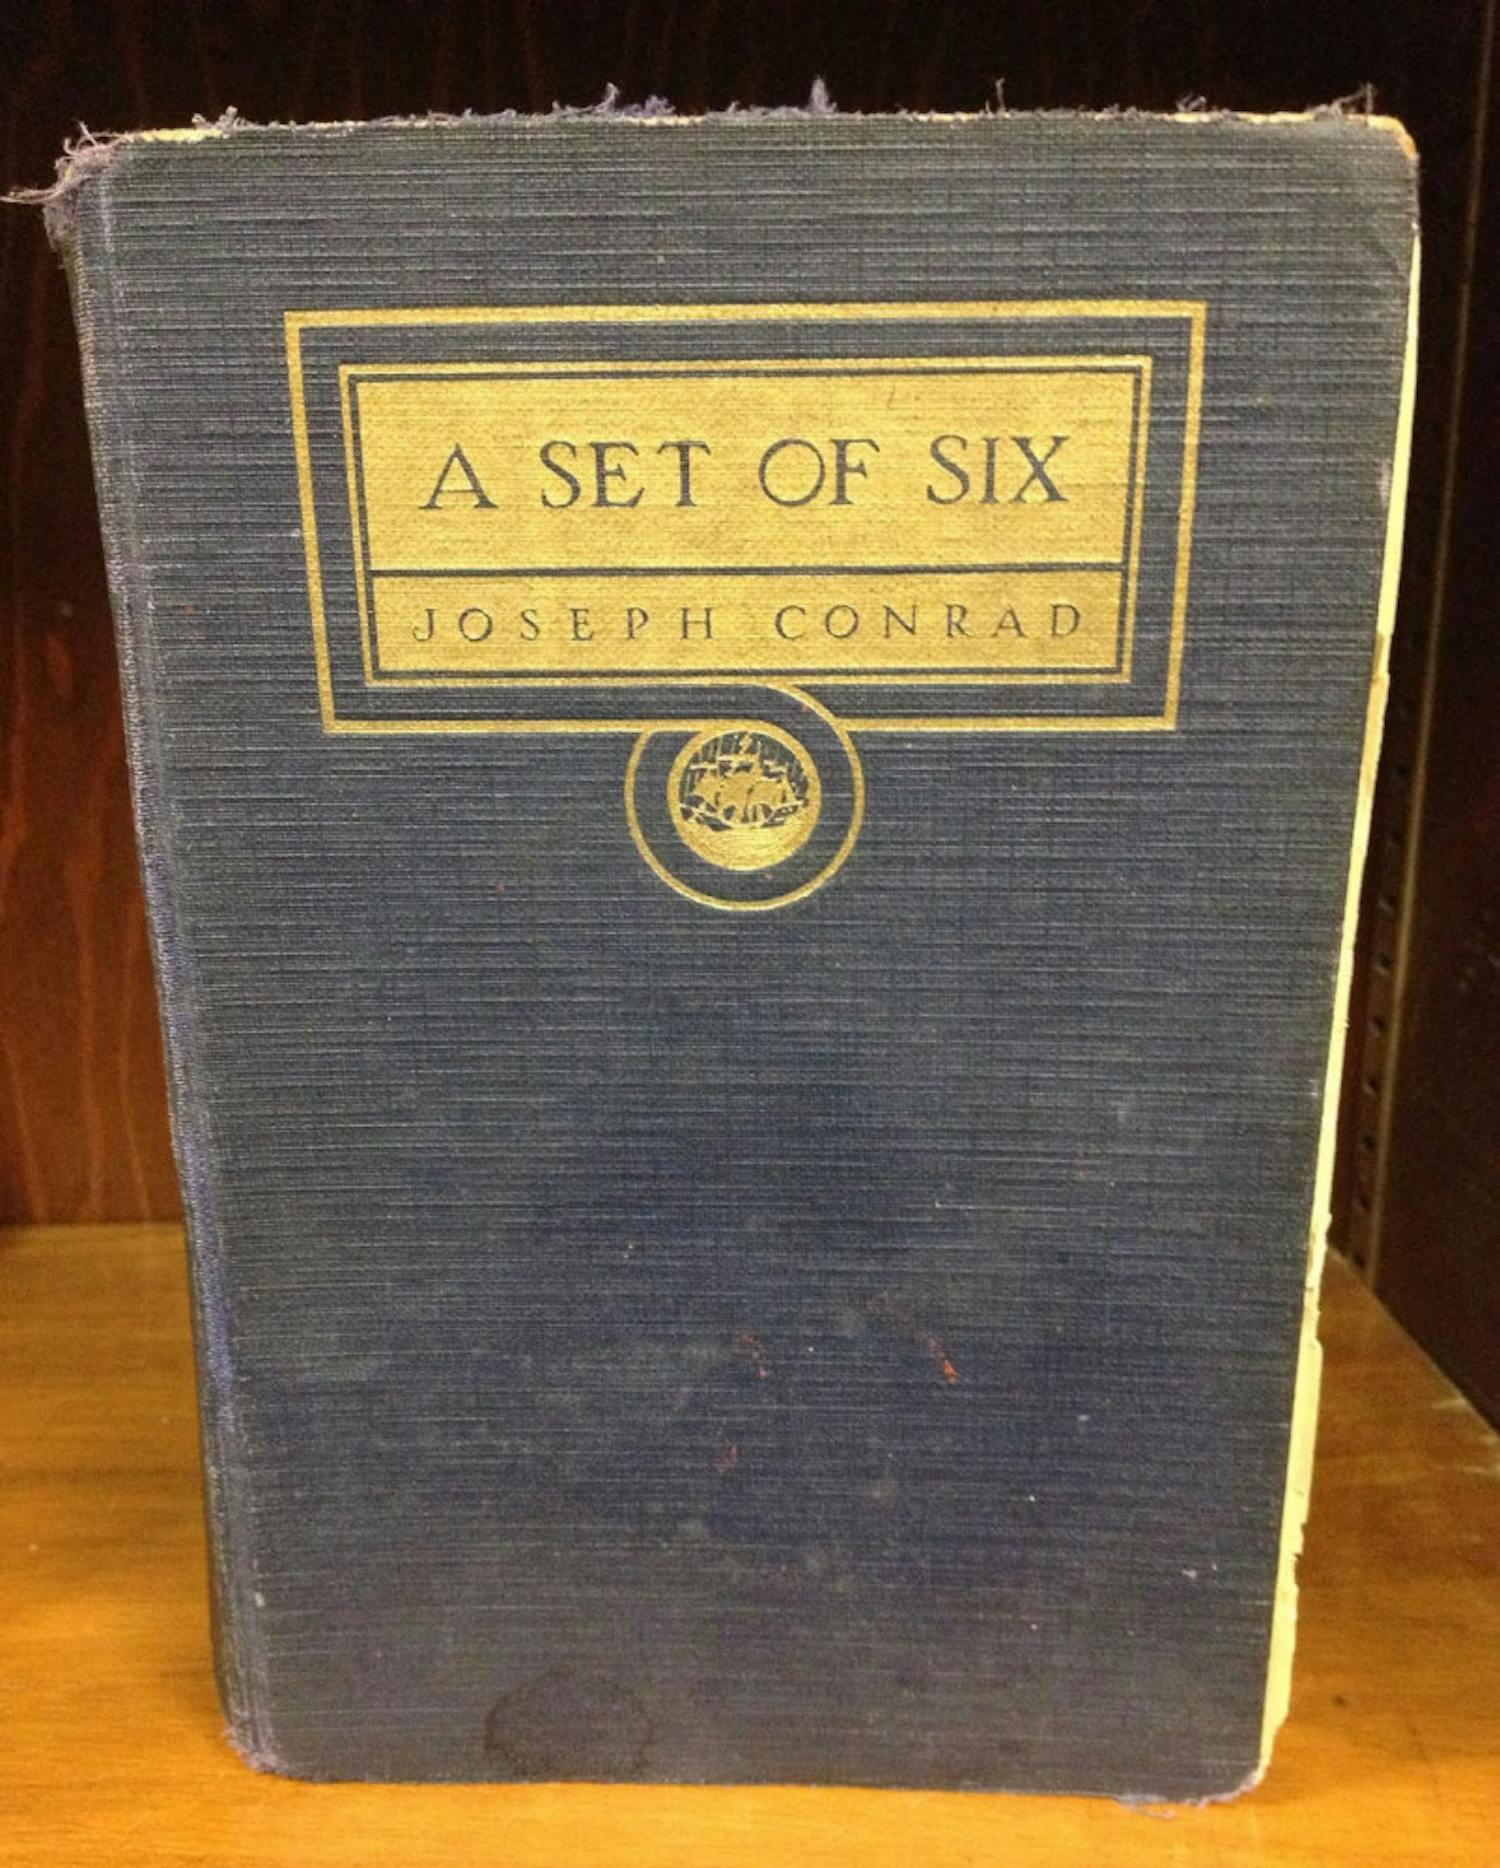 A Set of Six, by Joseph Conrad
$3
It’s from 1929! 